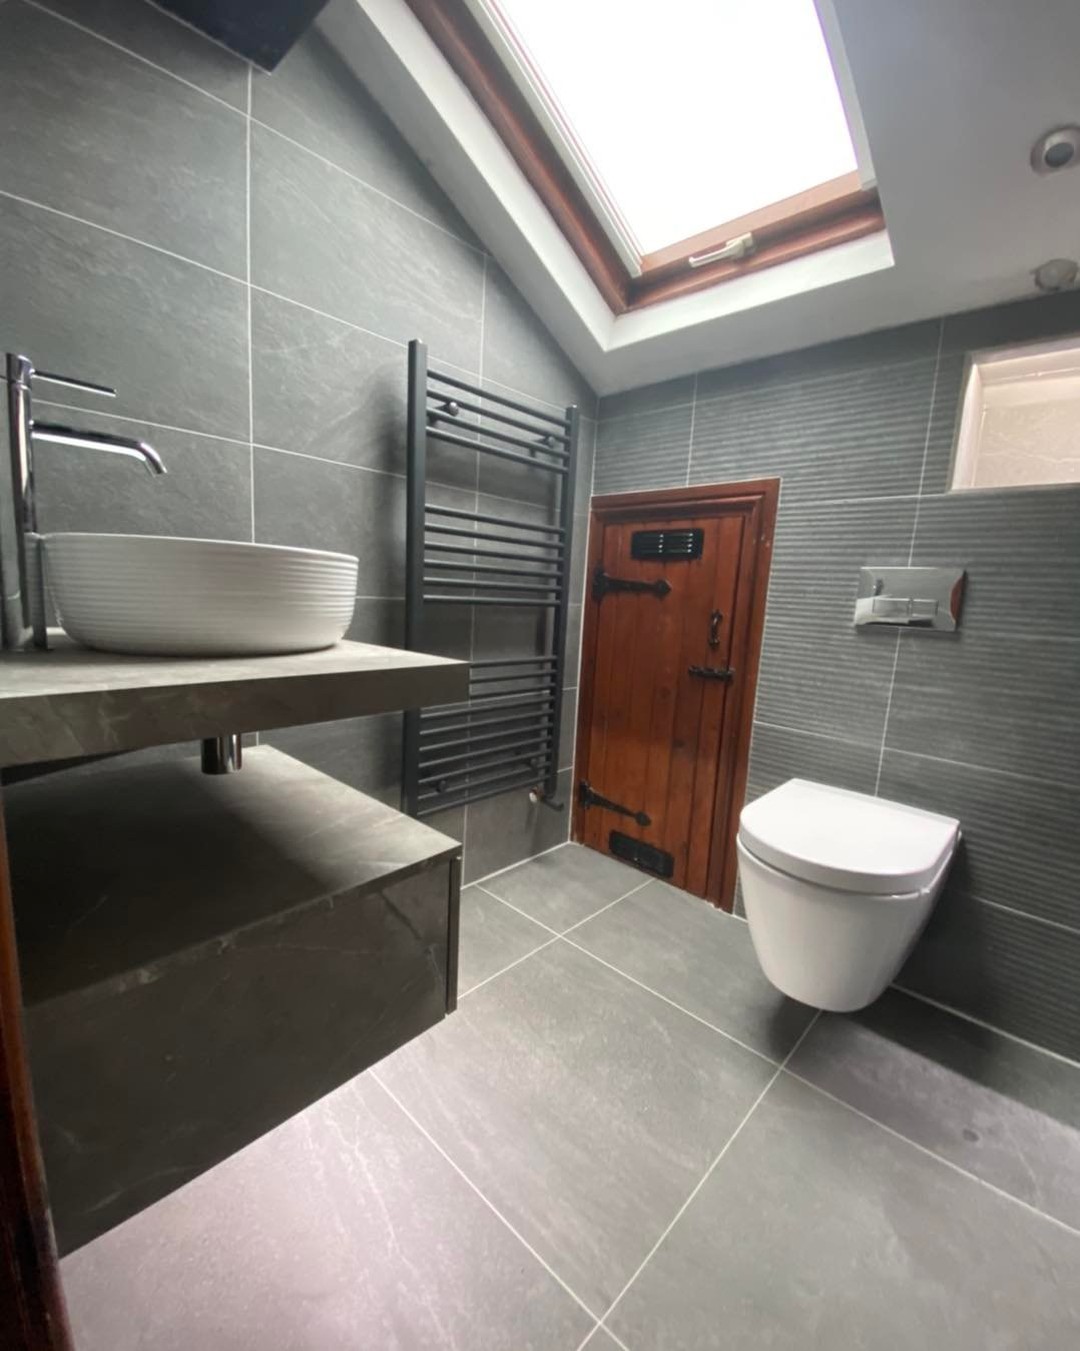 Bathroom Installations in Bootle